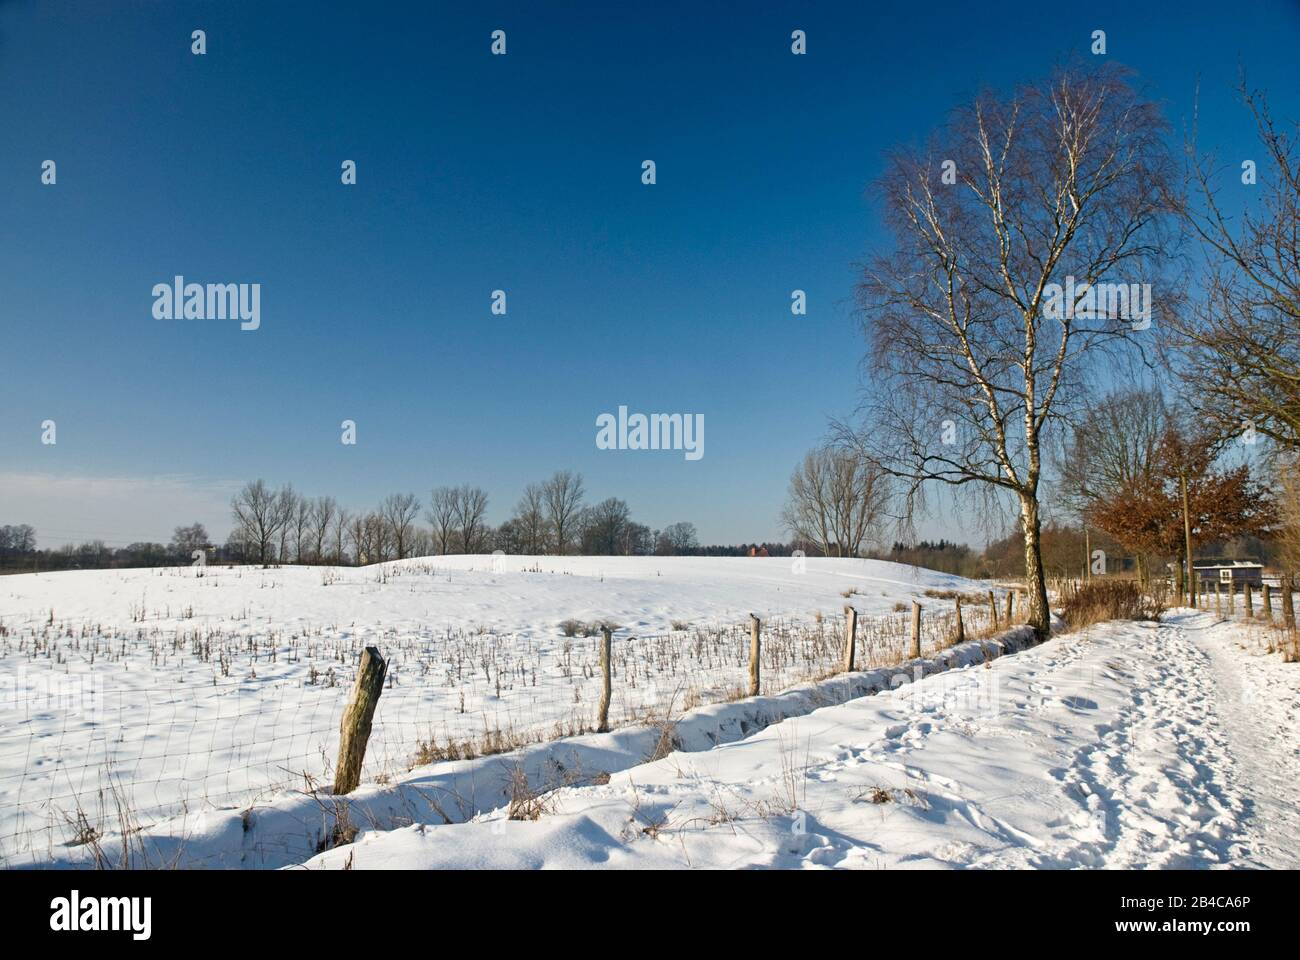 Wonderful rural country landscape on a cold winter day in nothern Germany Stock Photo